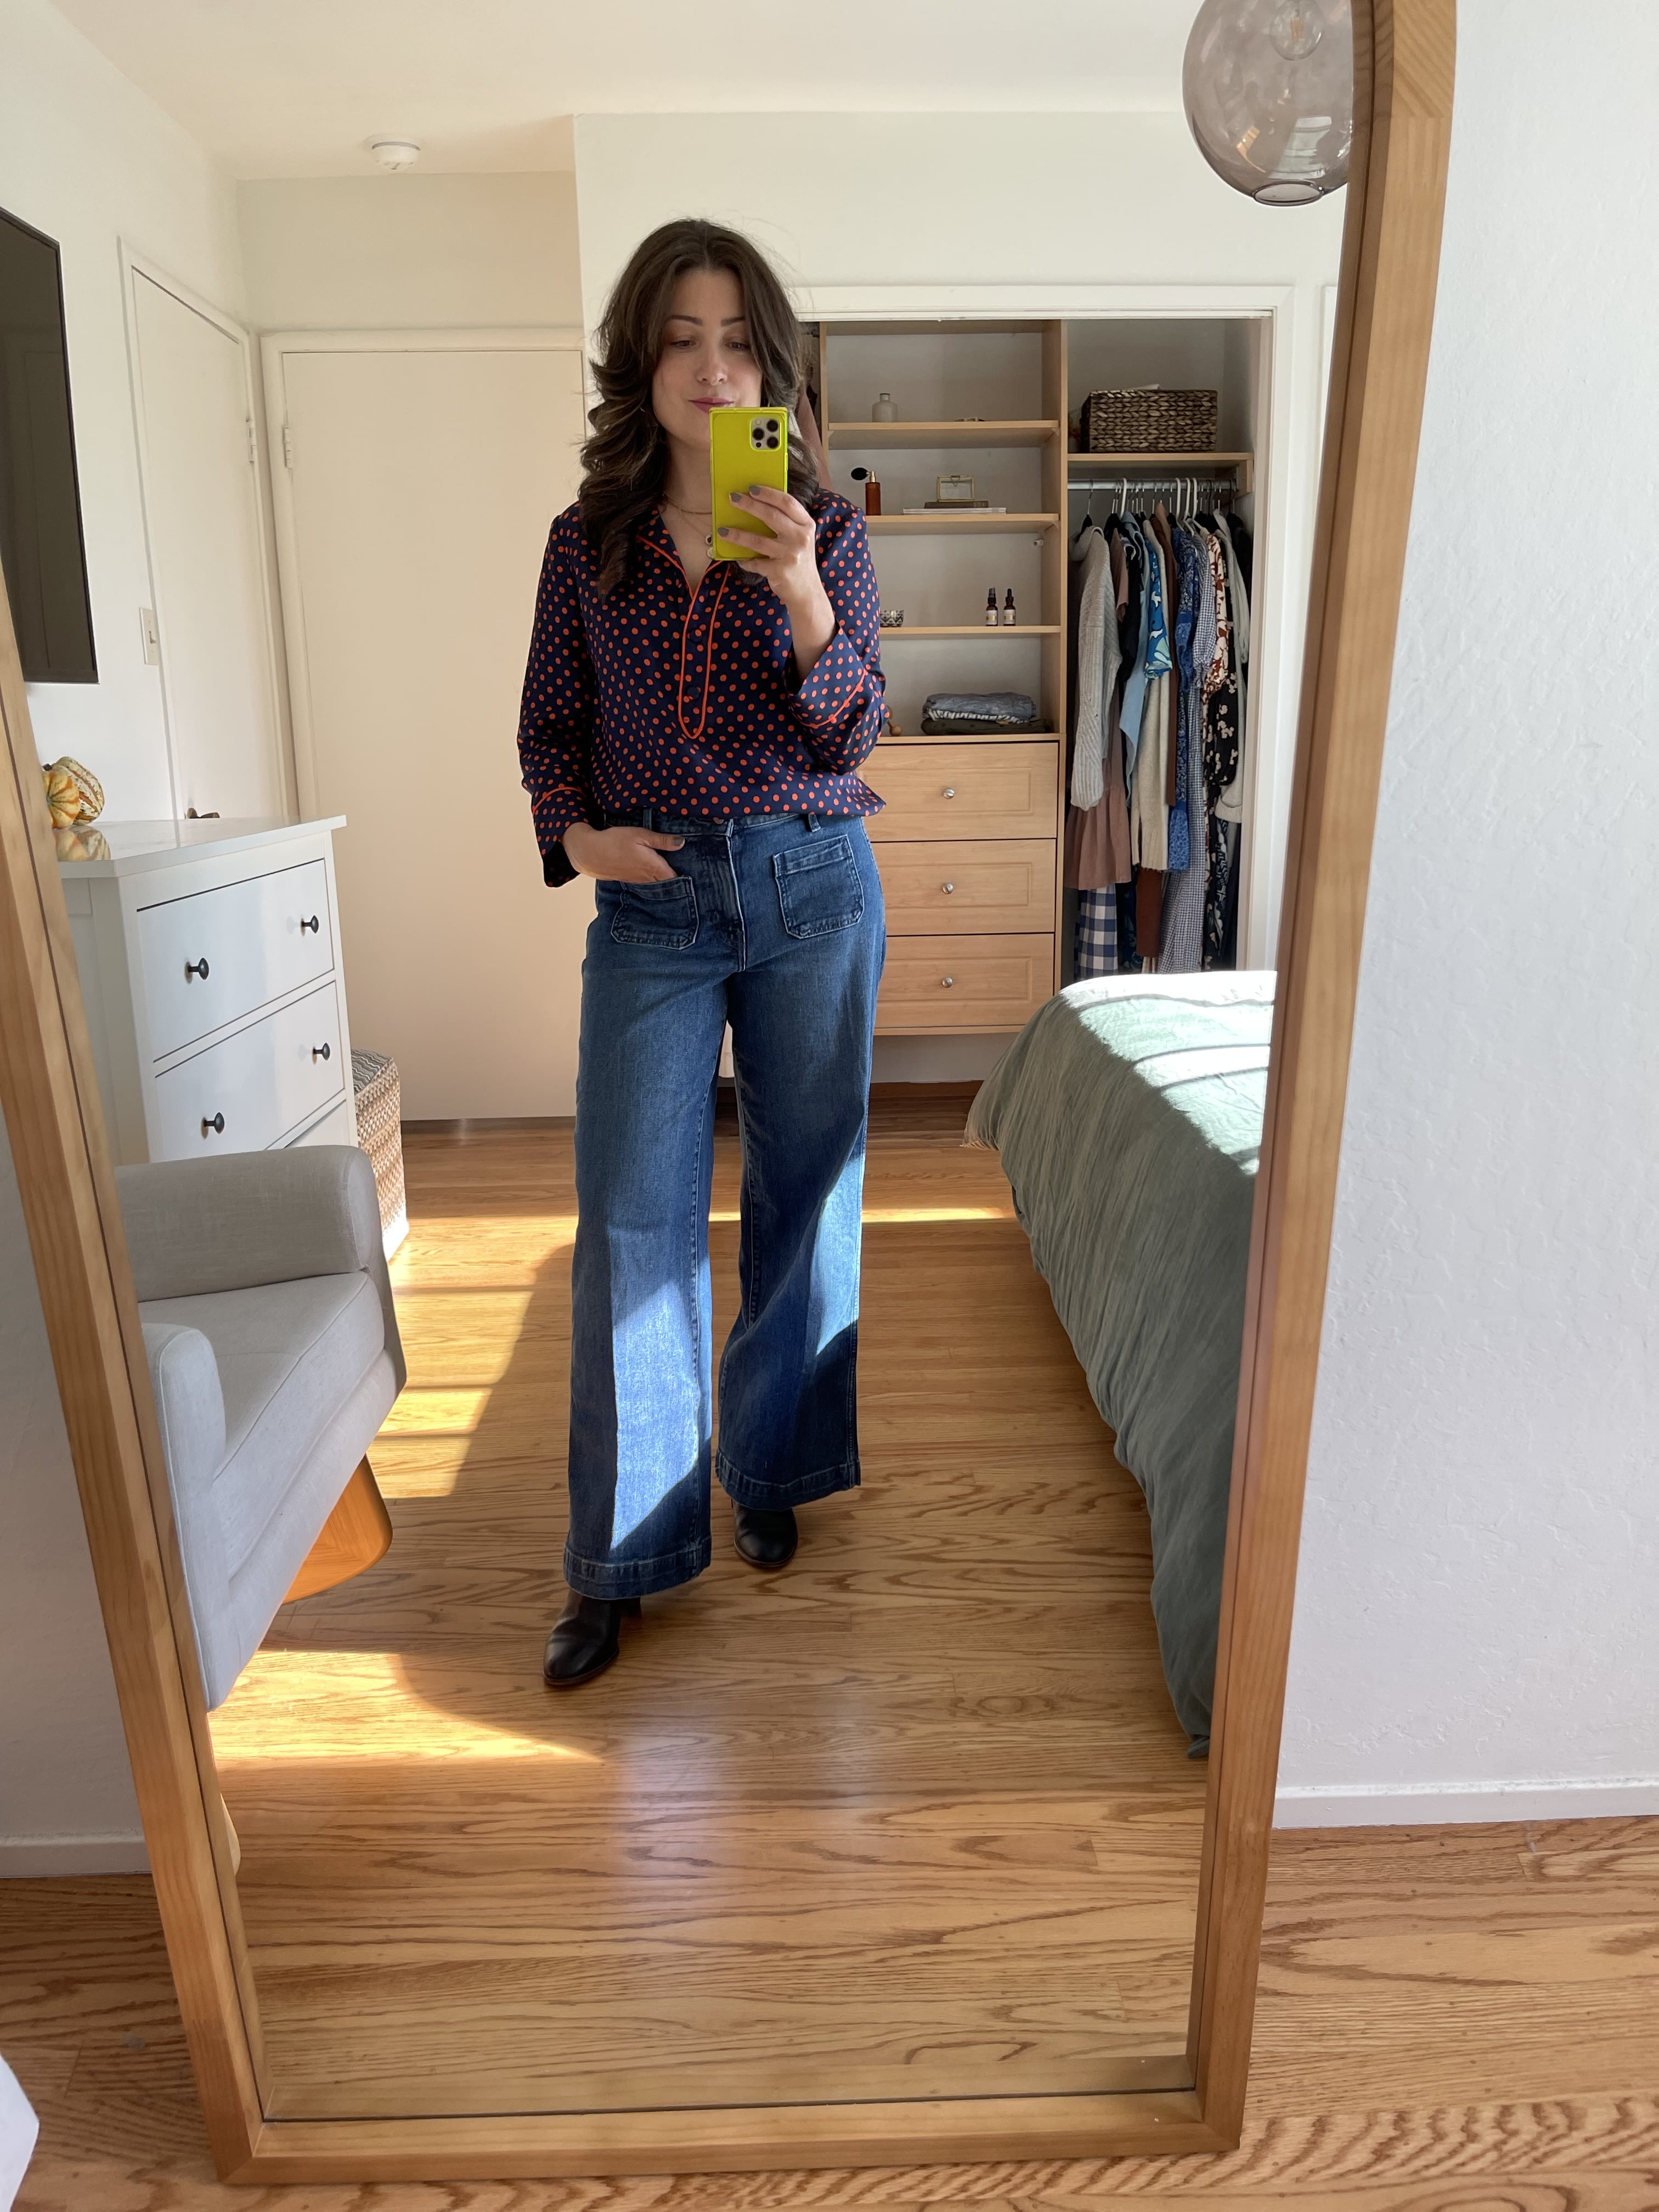 Old Navy Extra High-Waisted Jeans Review